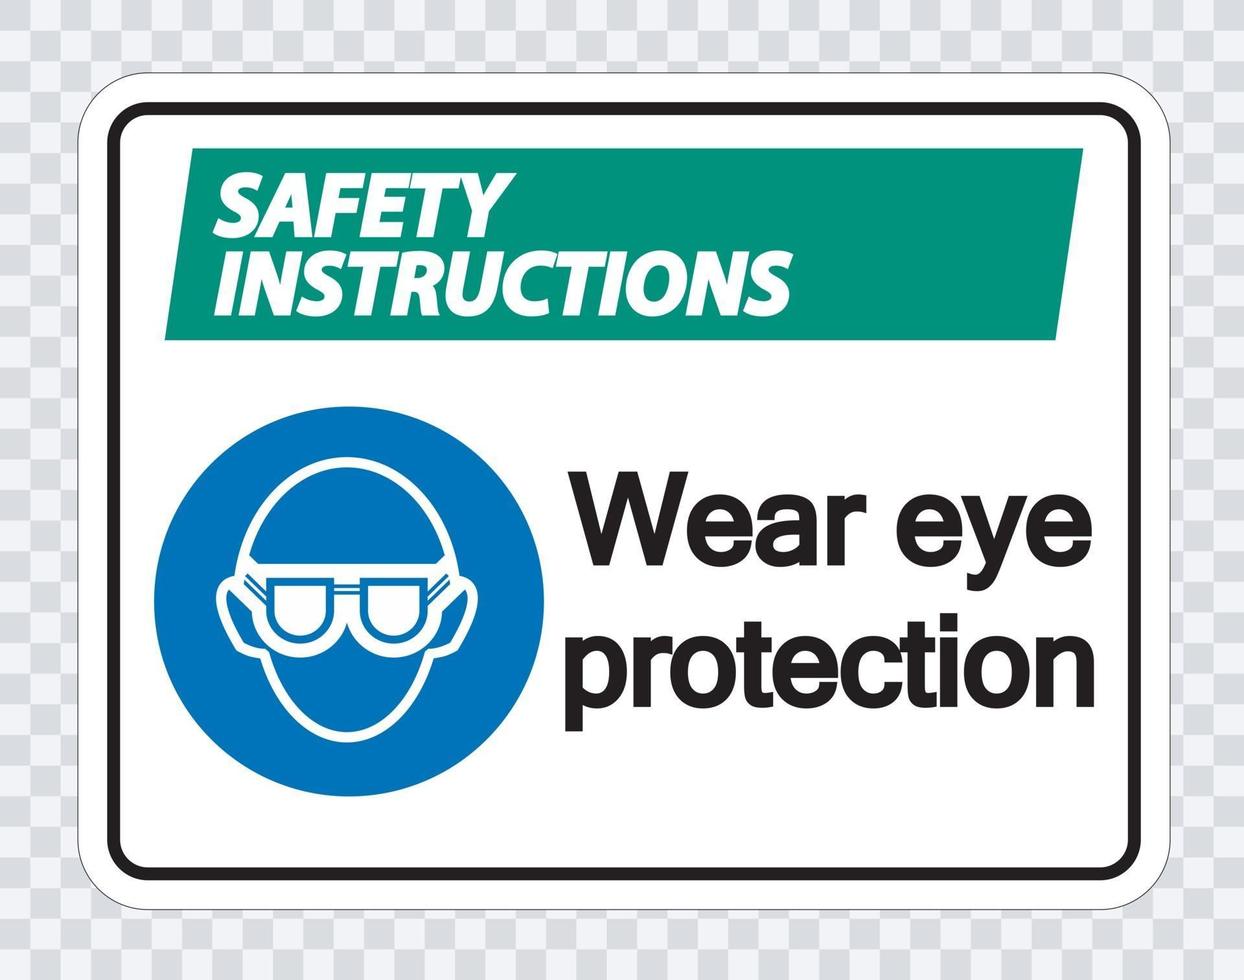 Safety instructions Wear eye protection on transparent background vector